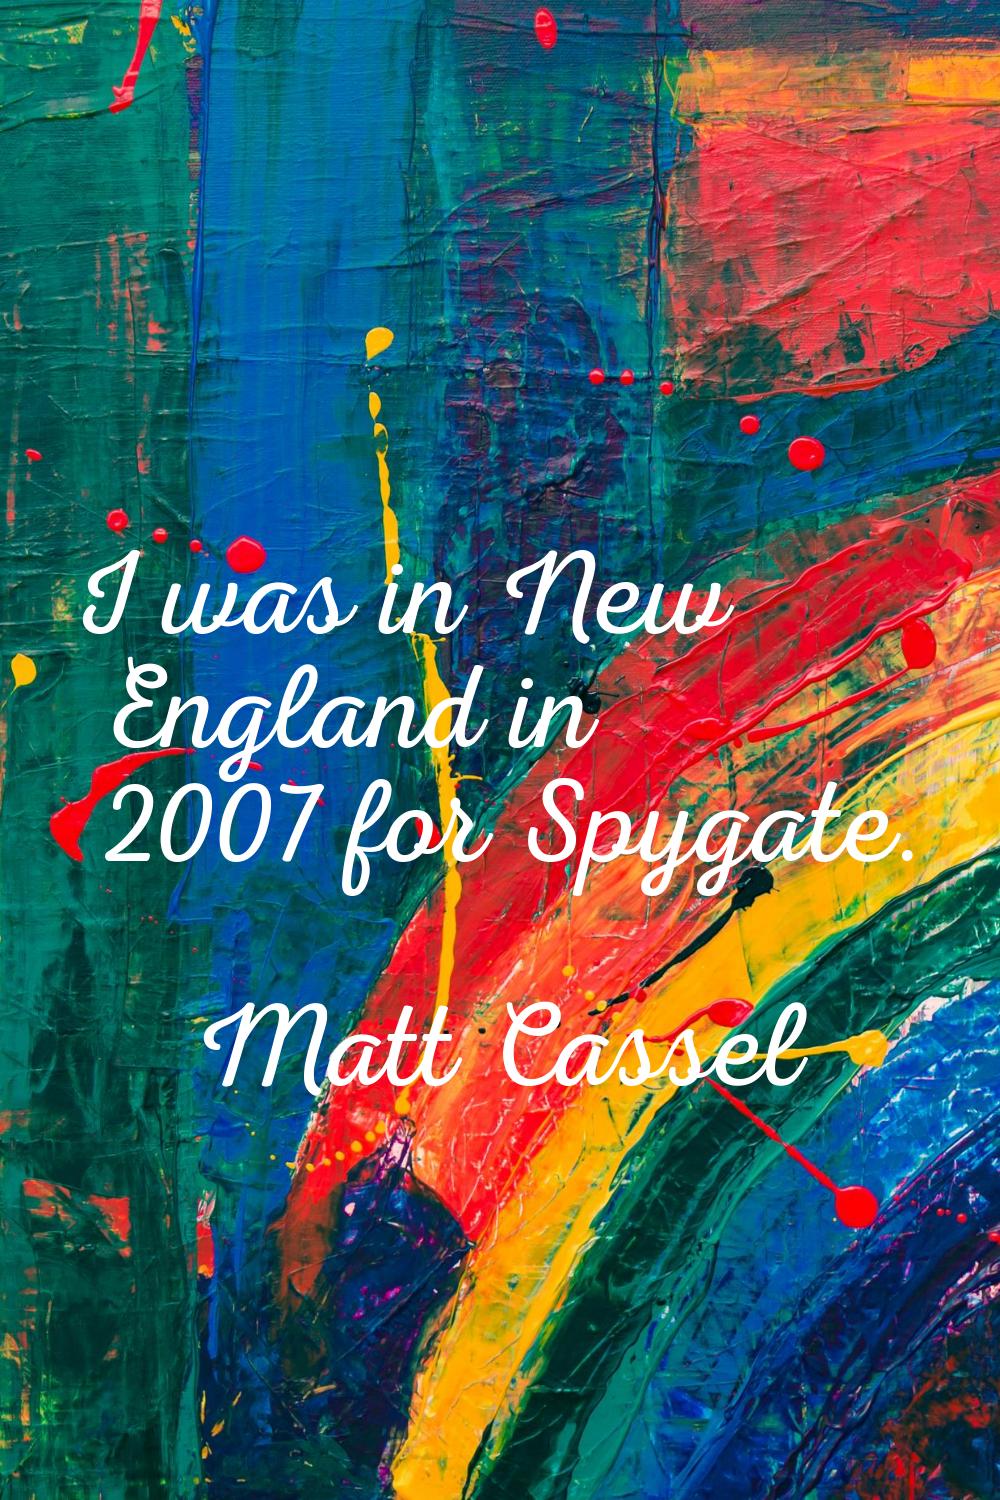 I was in New England in 2007 for Spygate.